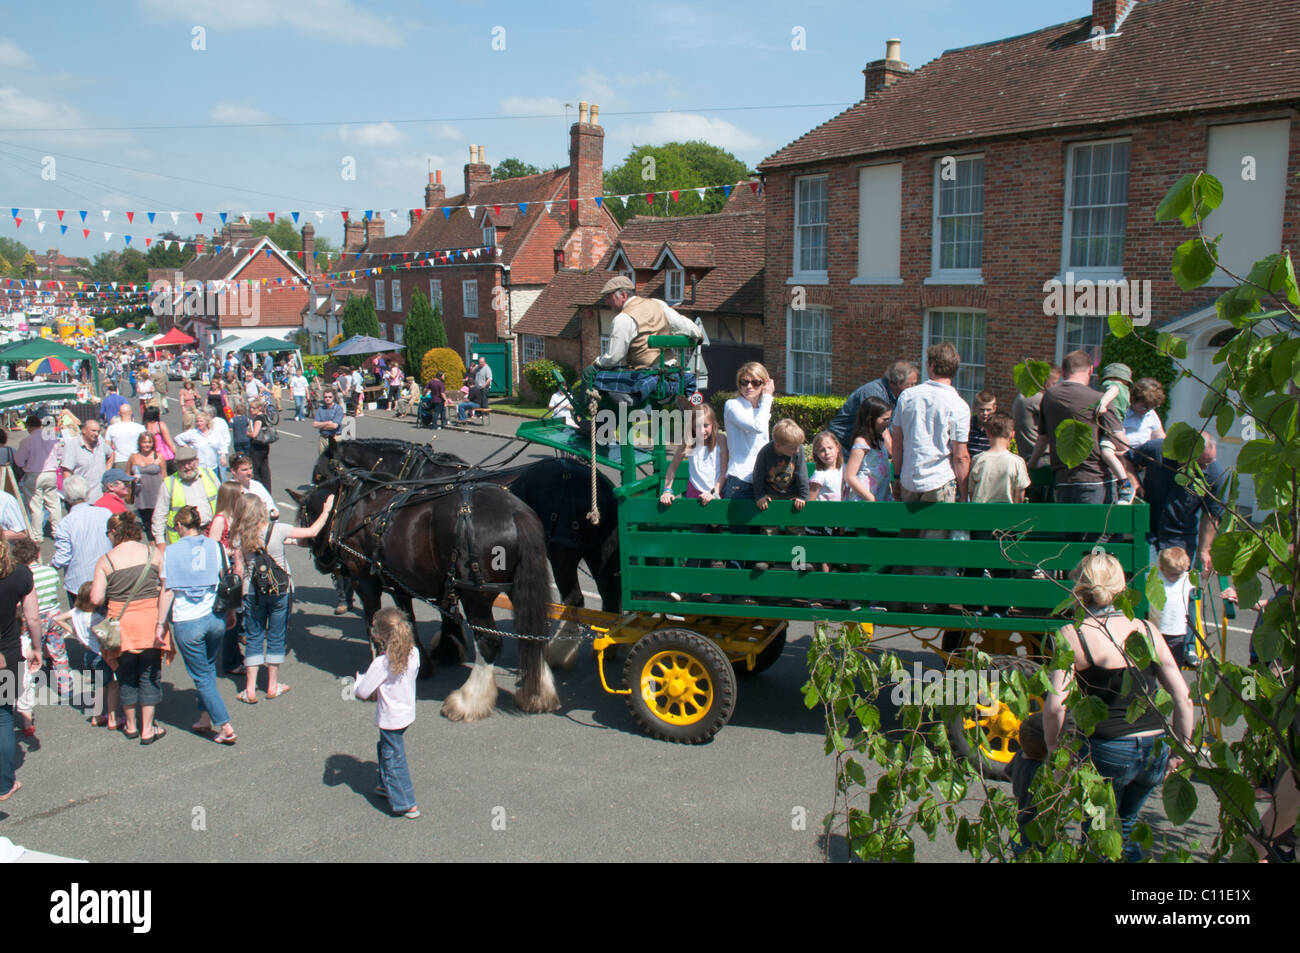 Harting Festivities. Fete held annually at May at South Harting, West Sussex, UK. Stock Photo